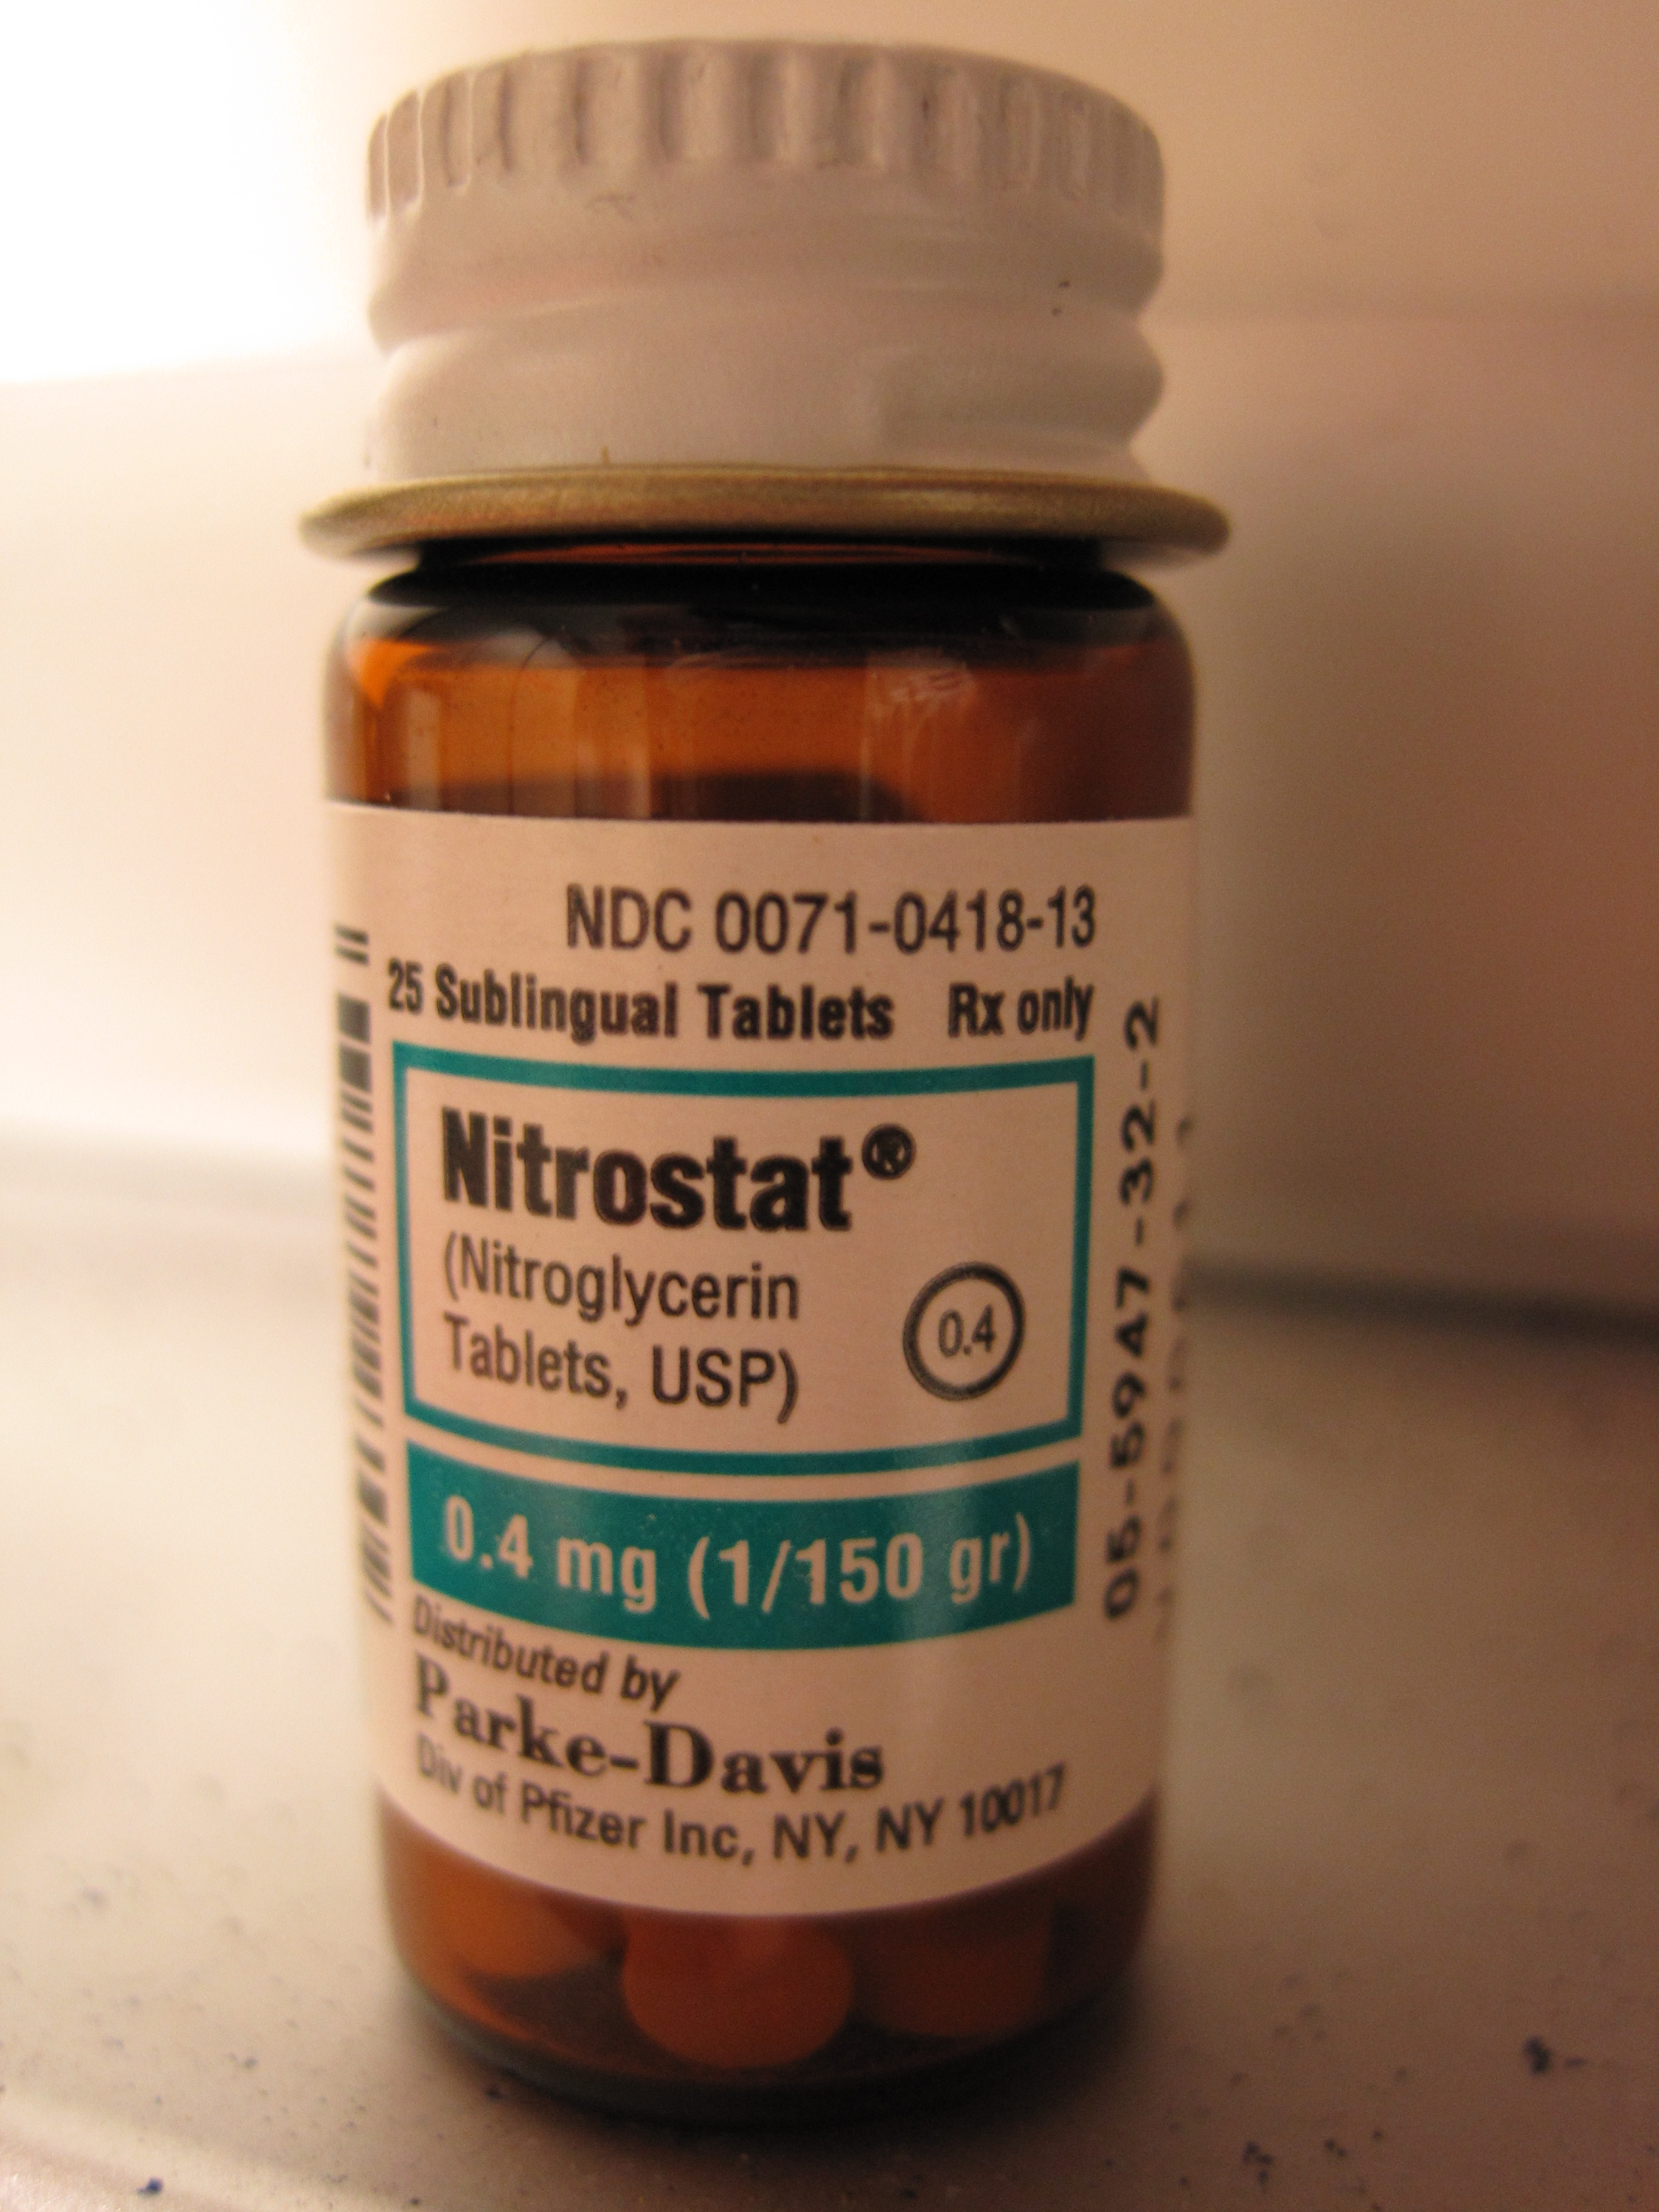 Photo showing a bottle containing nitroglycerin tablets